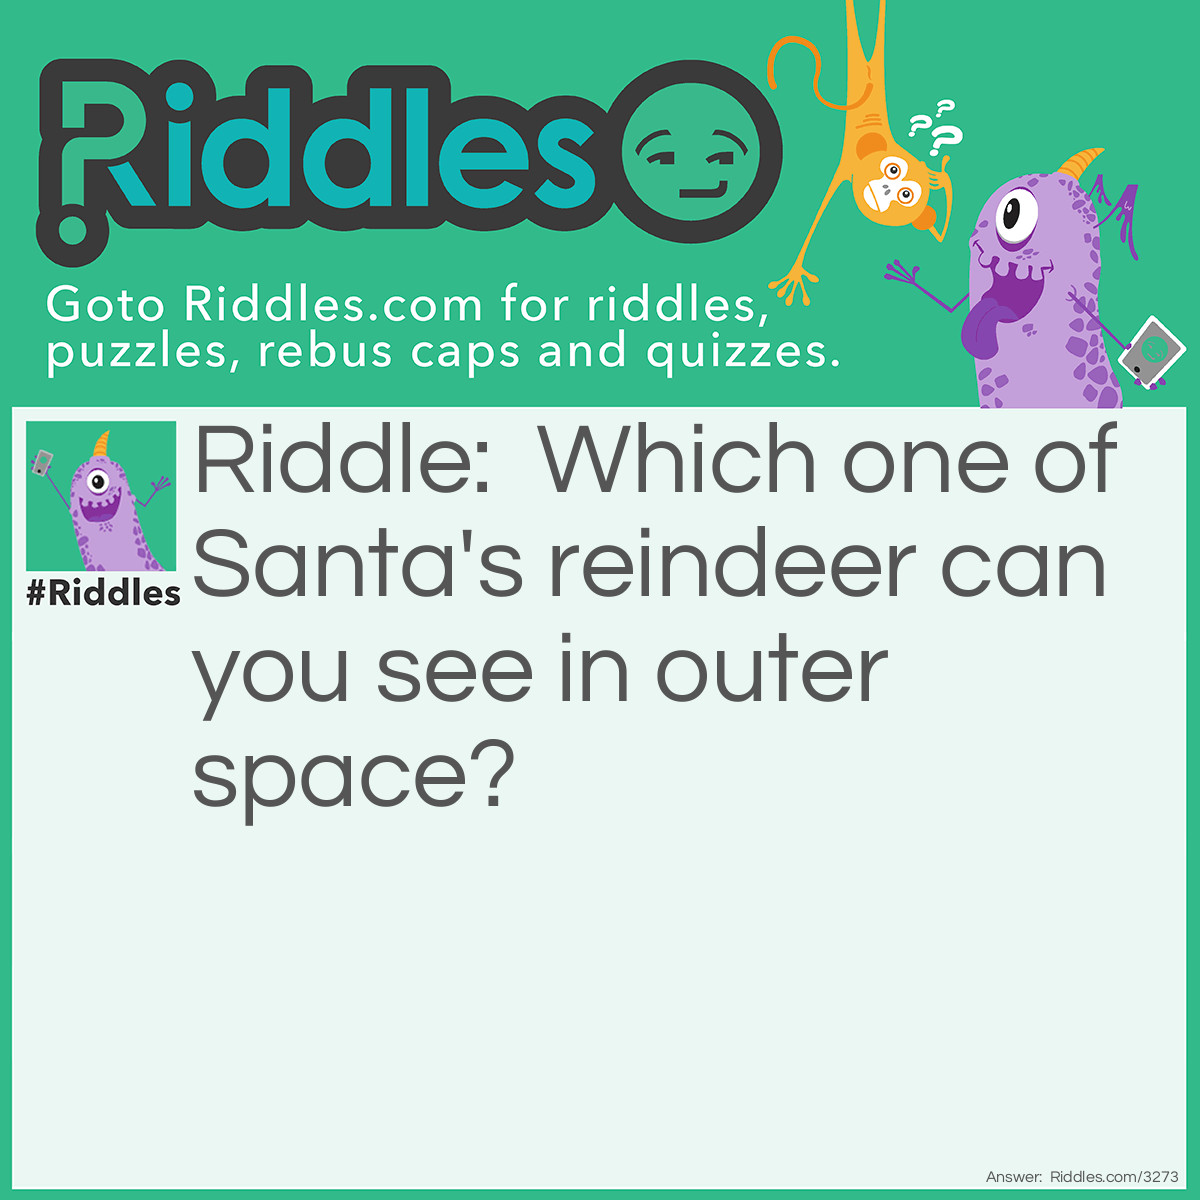 Riddle: Which one of Santa's reindeer can you see in outer space? Answer: Comet.